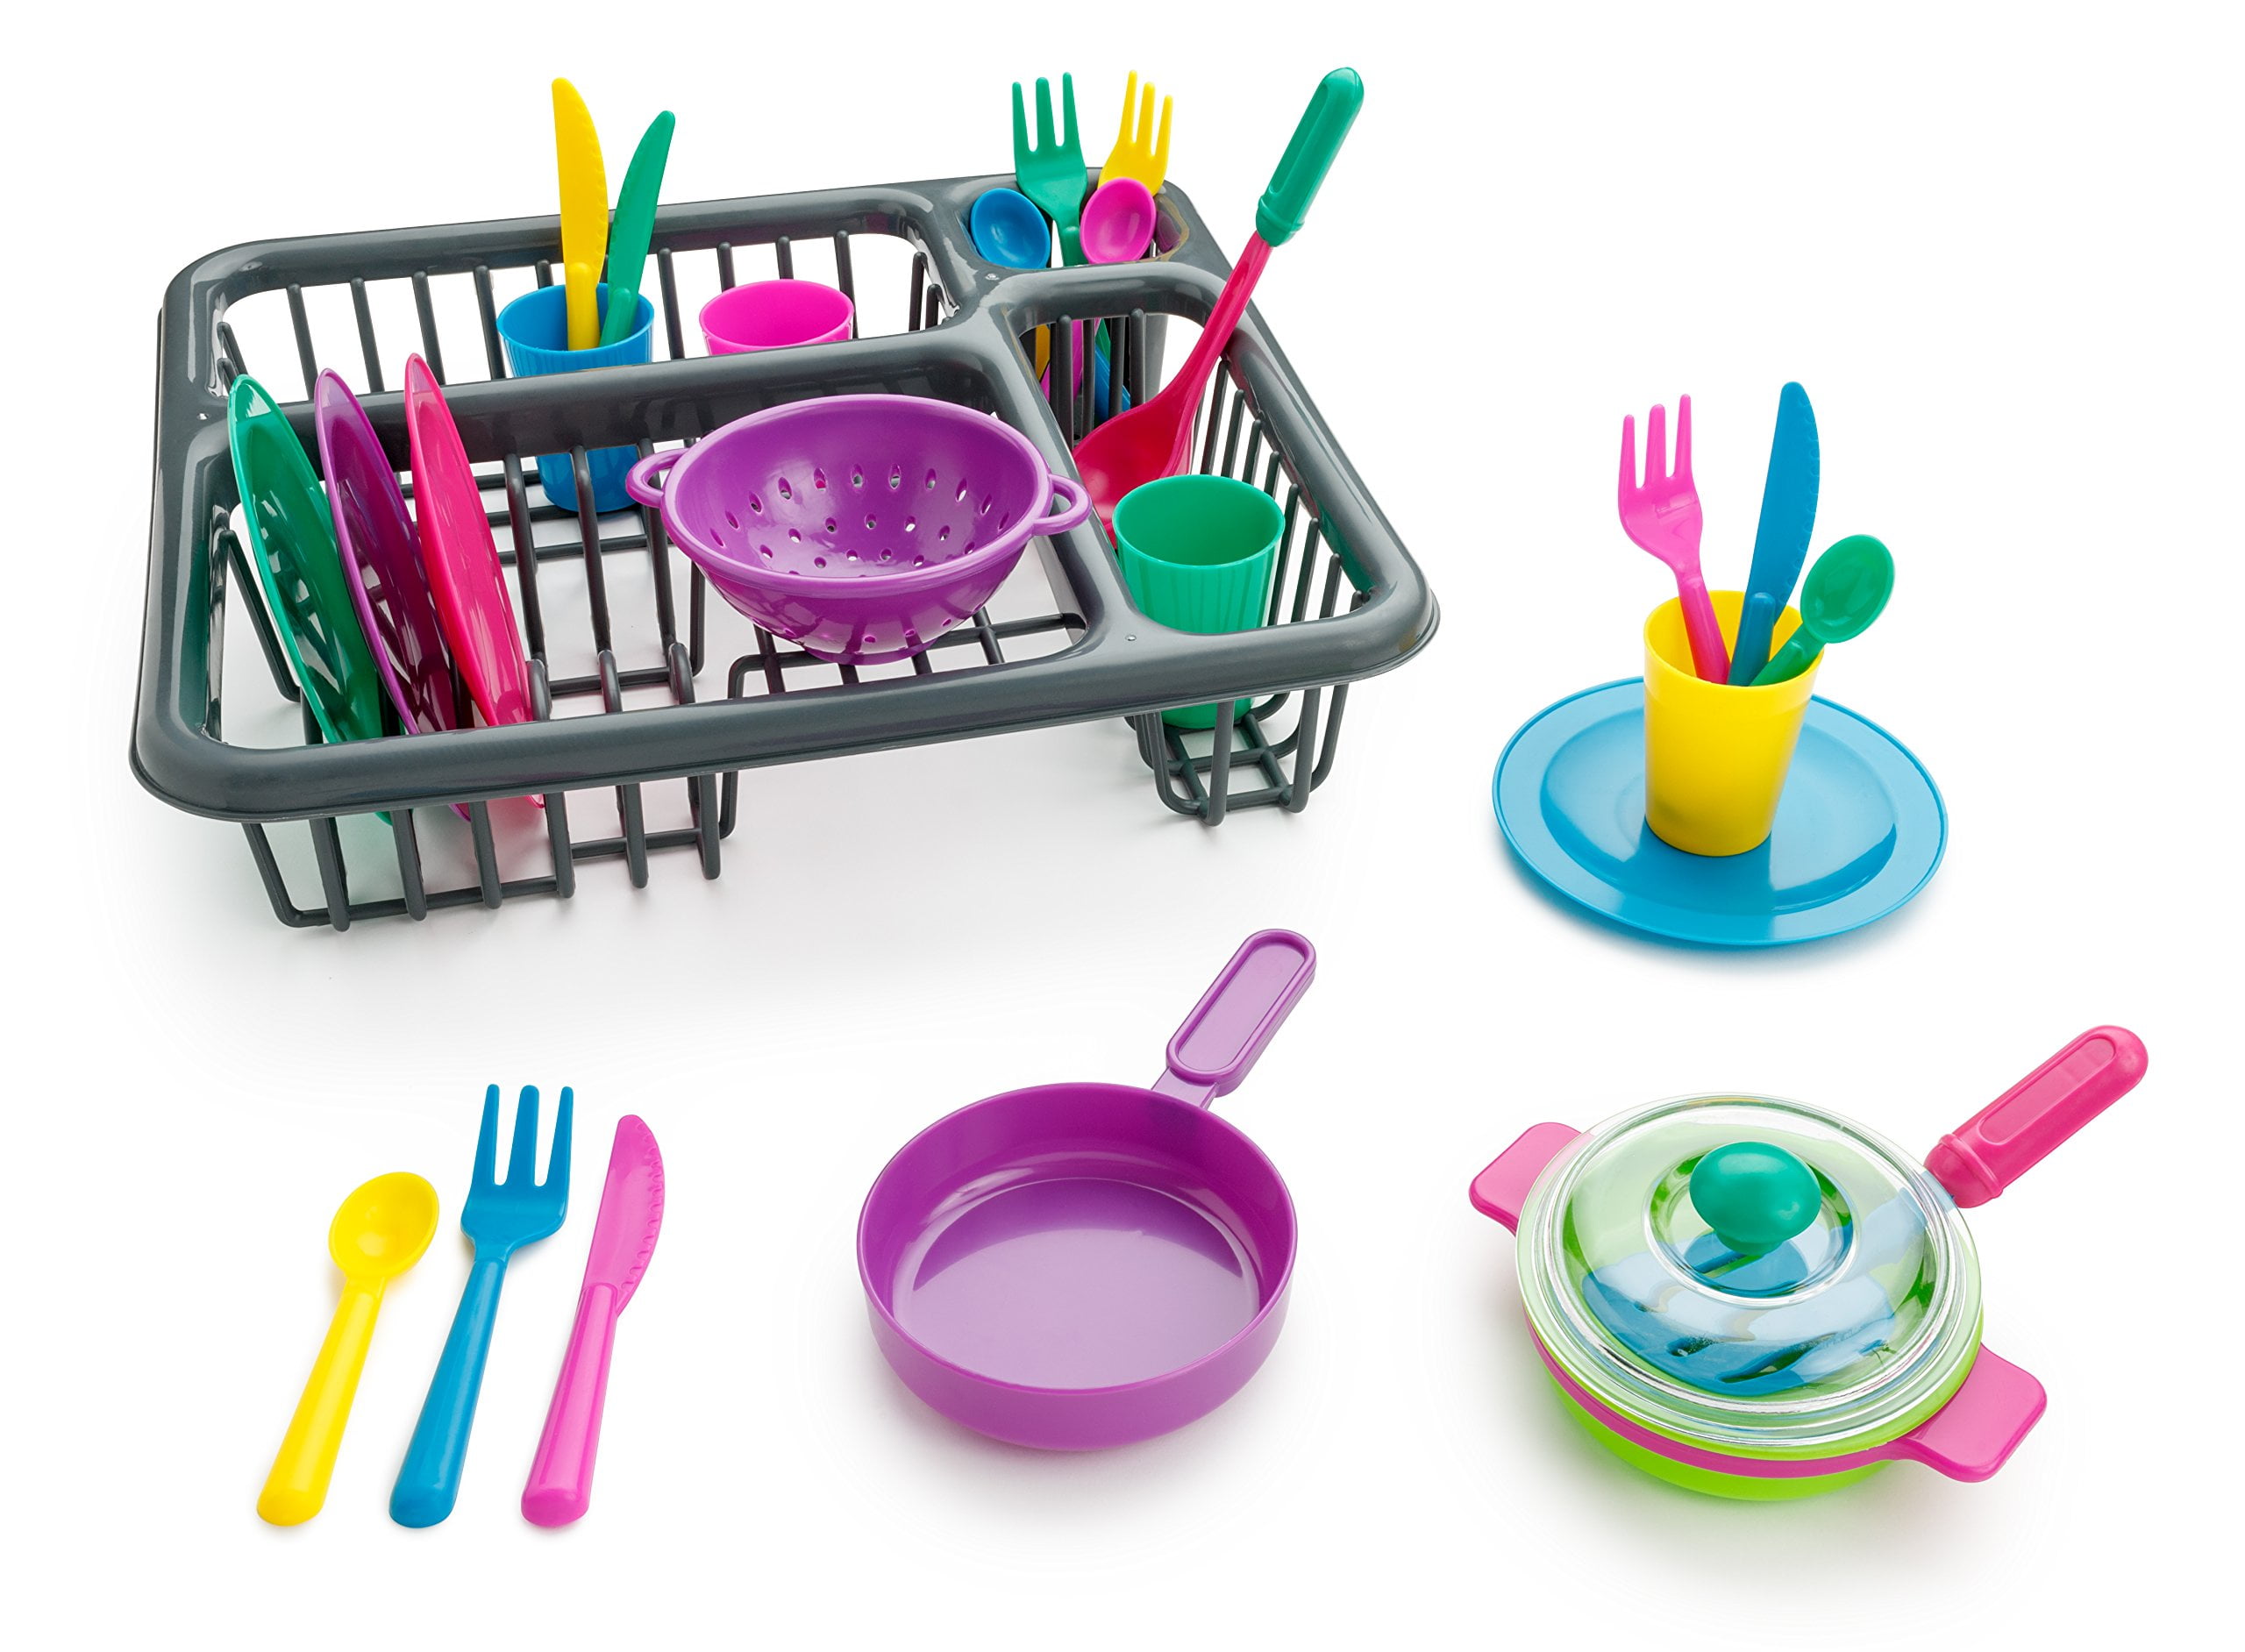 Kids CHildren Dishes and Utensils Playset with Drainer Kitchen Accessory Toy 